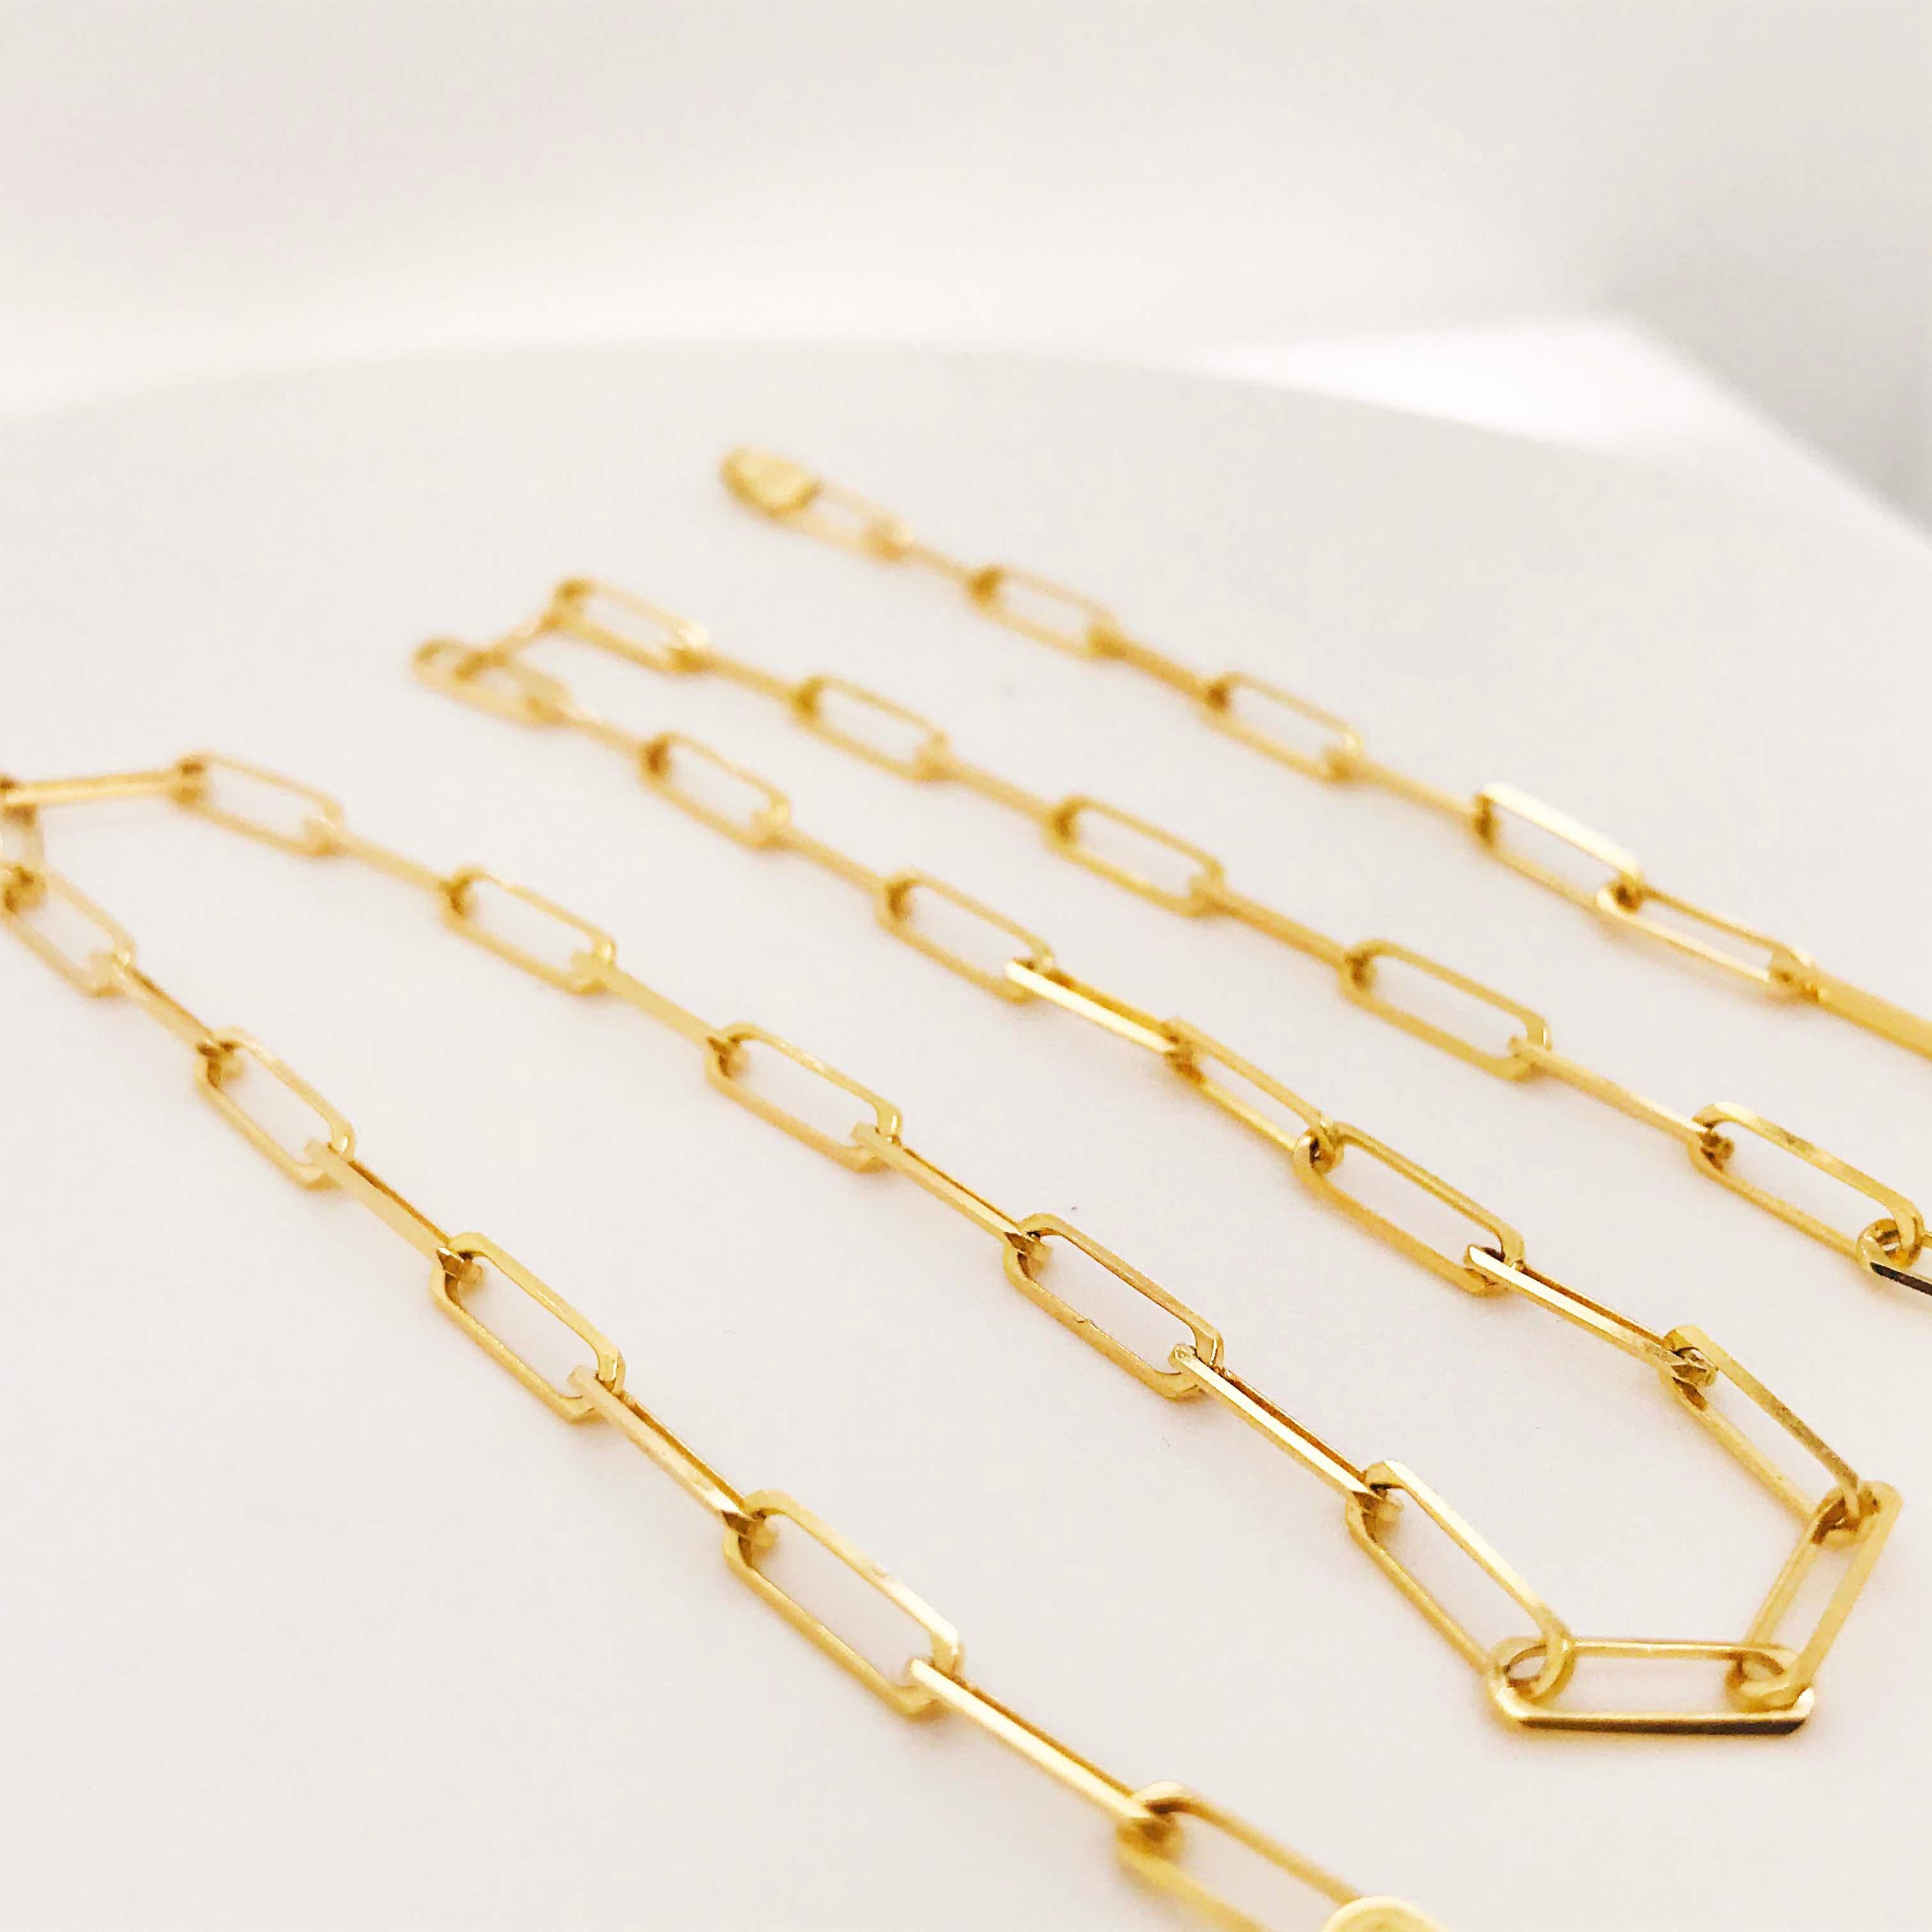 Paperclip Link Chain Necklace in 14 Karat Yellow Gold, 14 Karat Paperclip 3